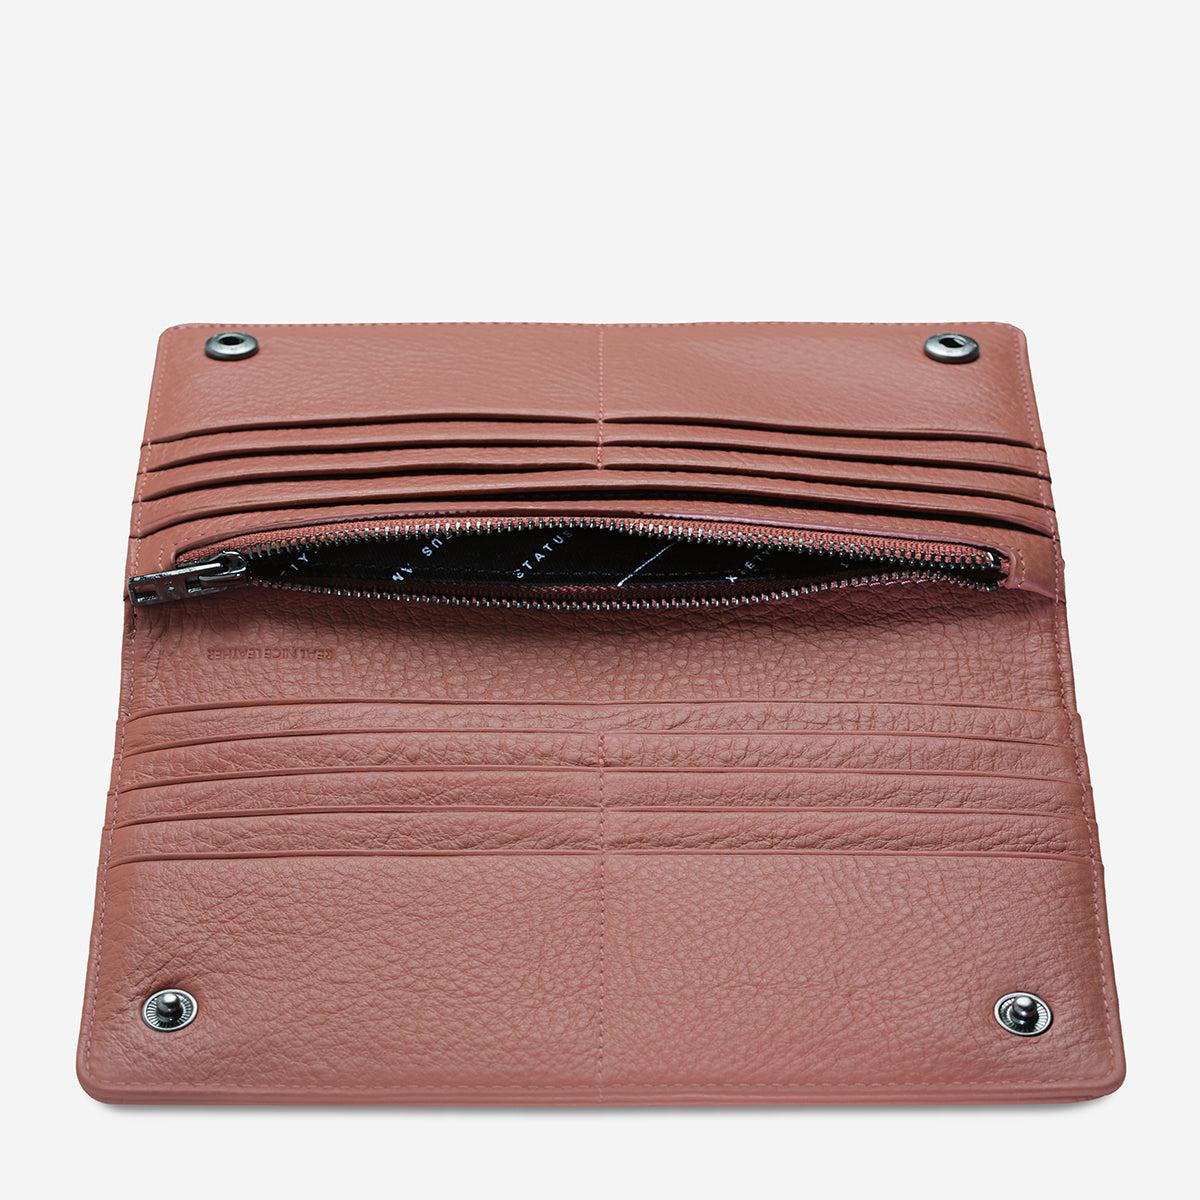 Living Proof Leather Wallet - Dusty Rose